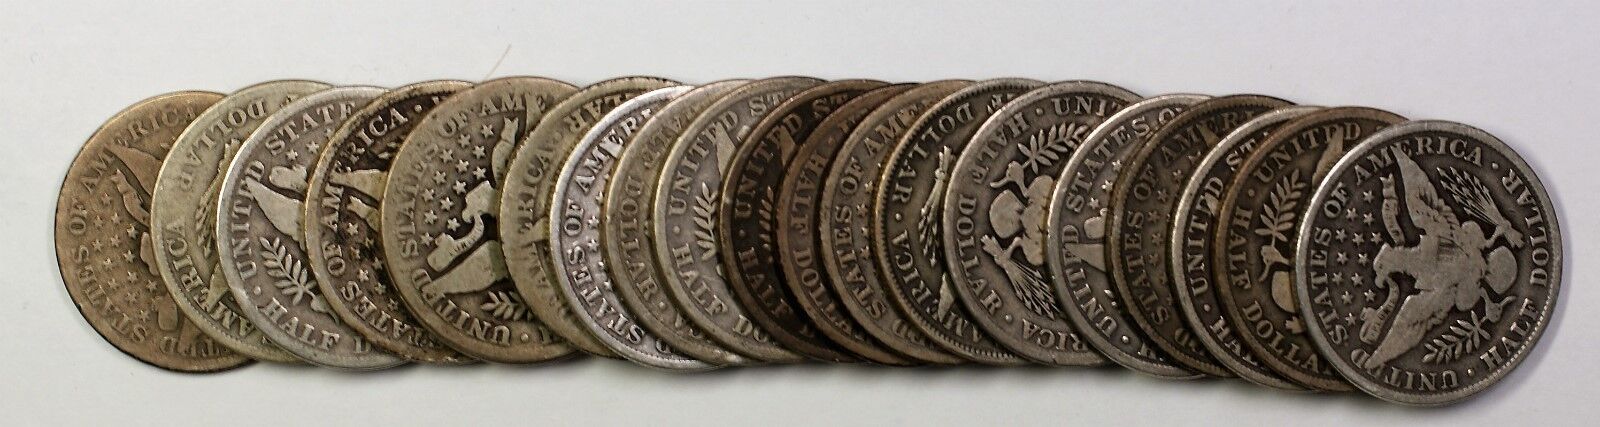 1907-S Barber Half Dollar 50c Roll 20 Circulated 90% Old Silver Coins Lot